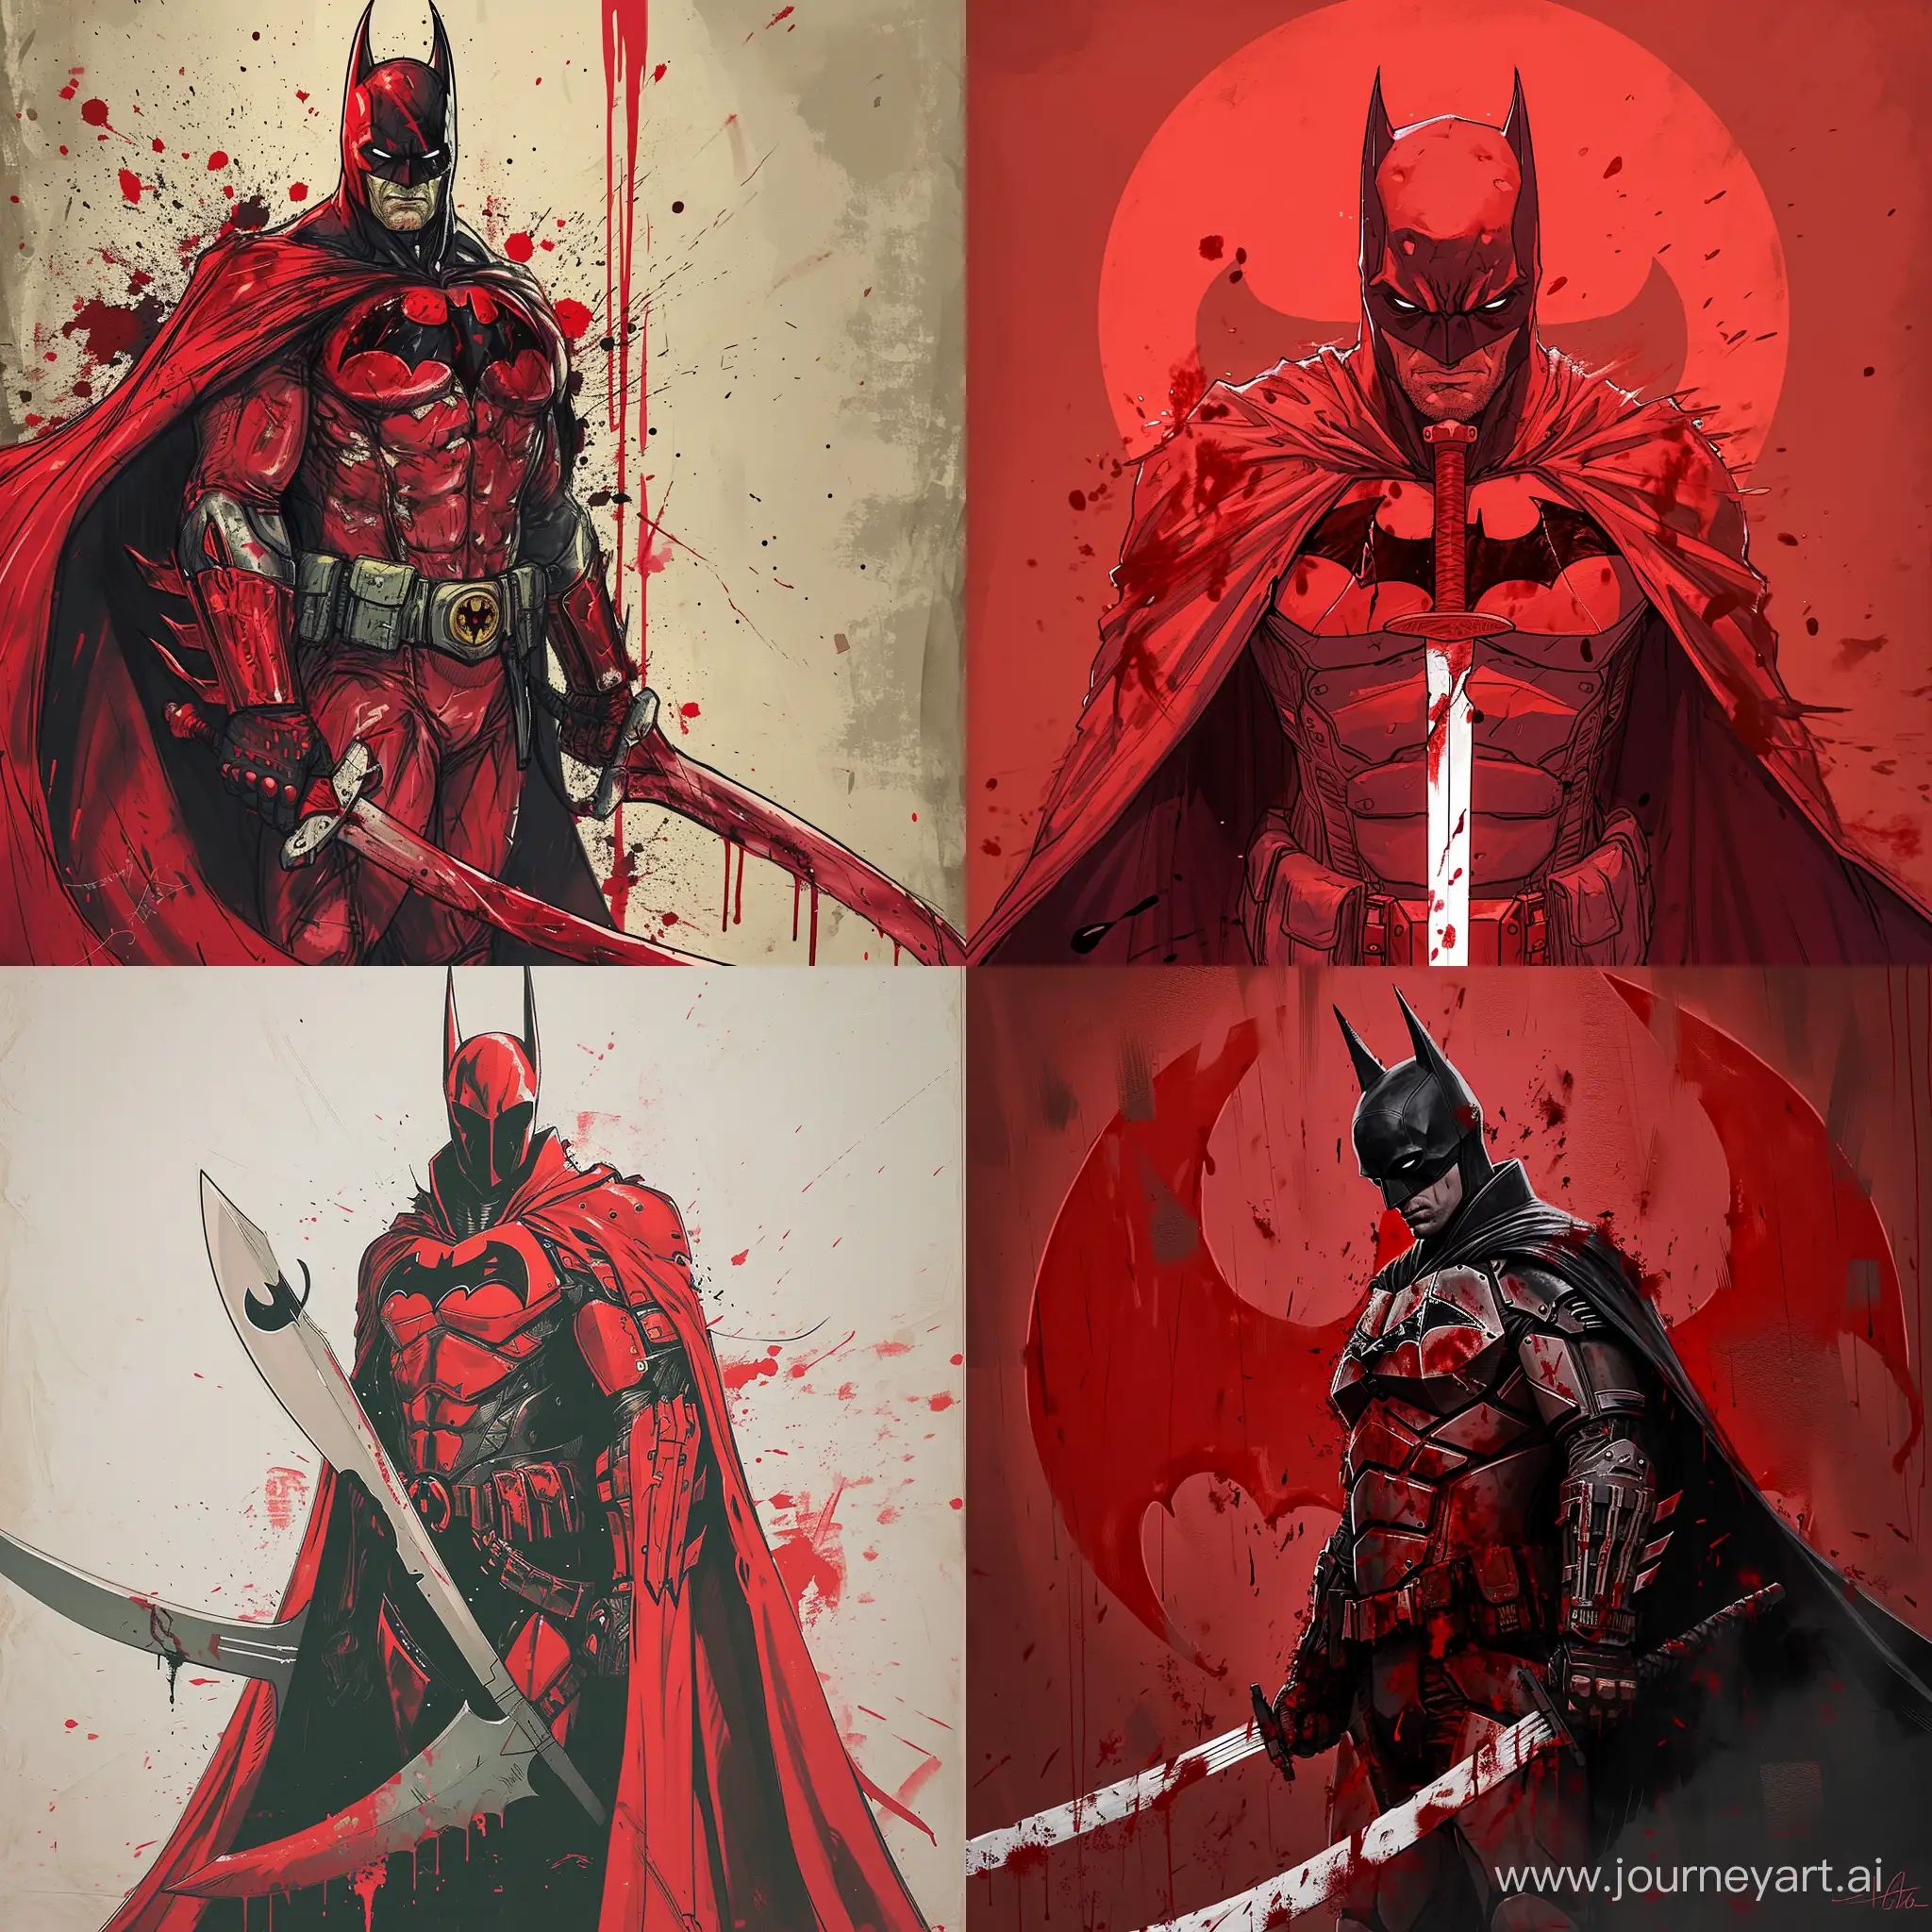 Dark-Knight-with-BloodRed-Sword-and-Crescent-Moon-Symbol